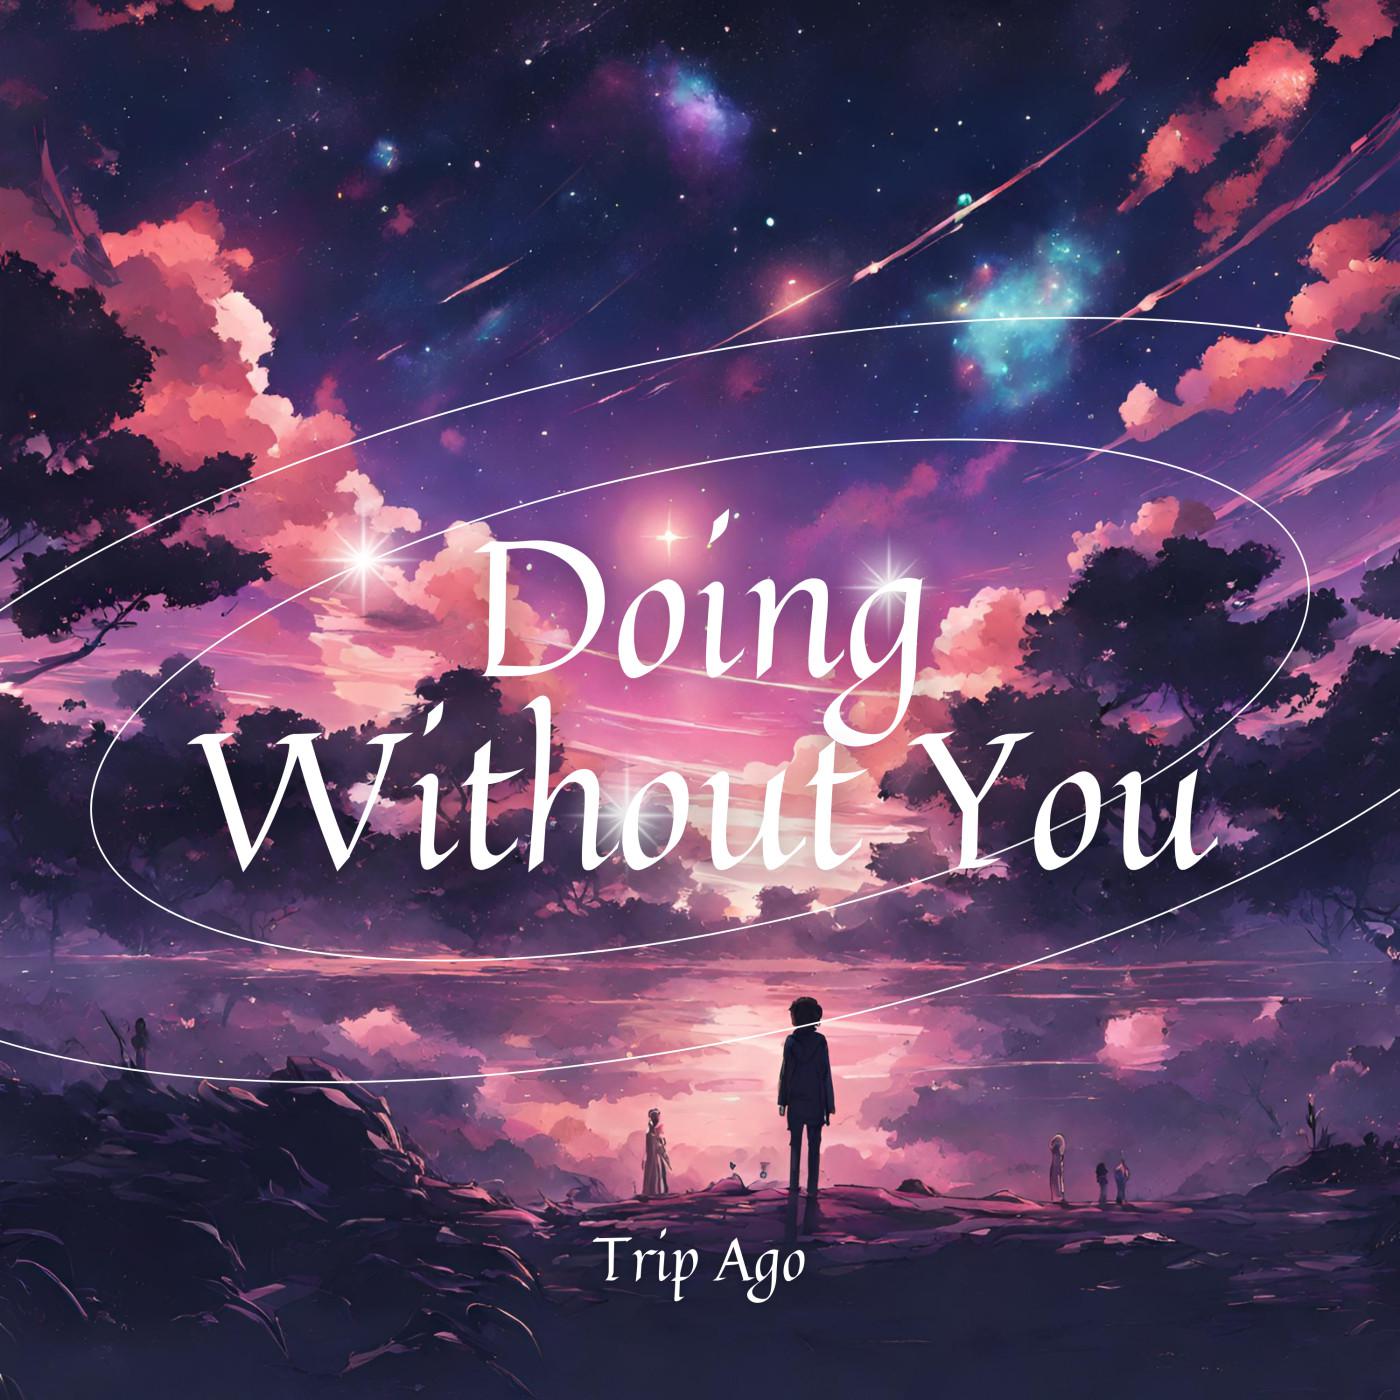 Trip Ago - Doing Without You